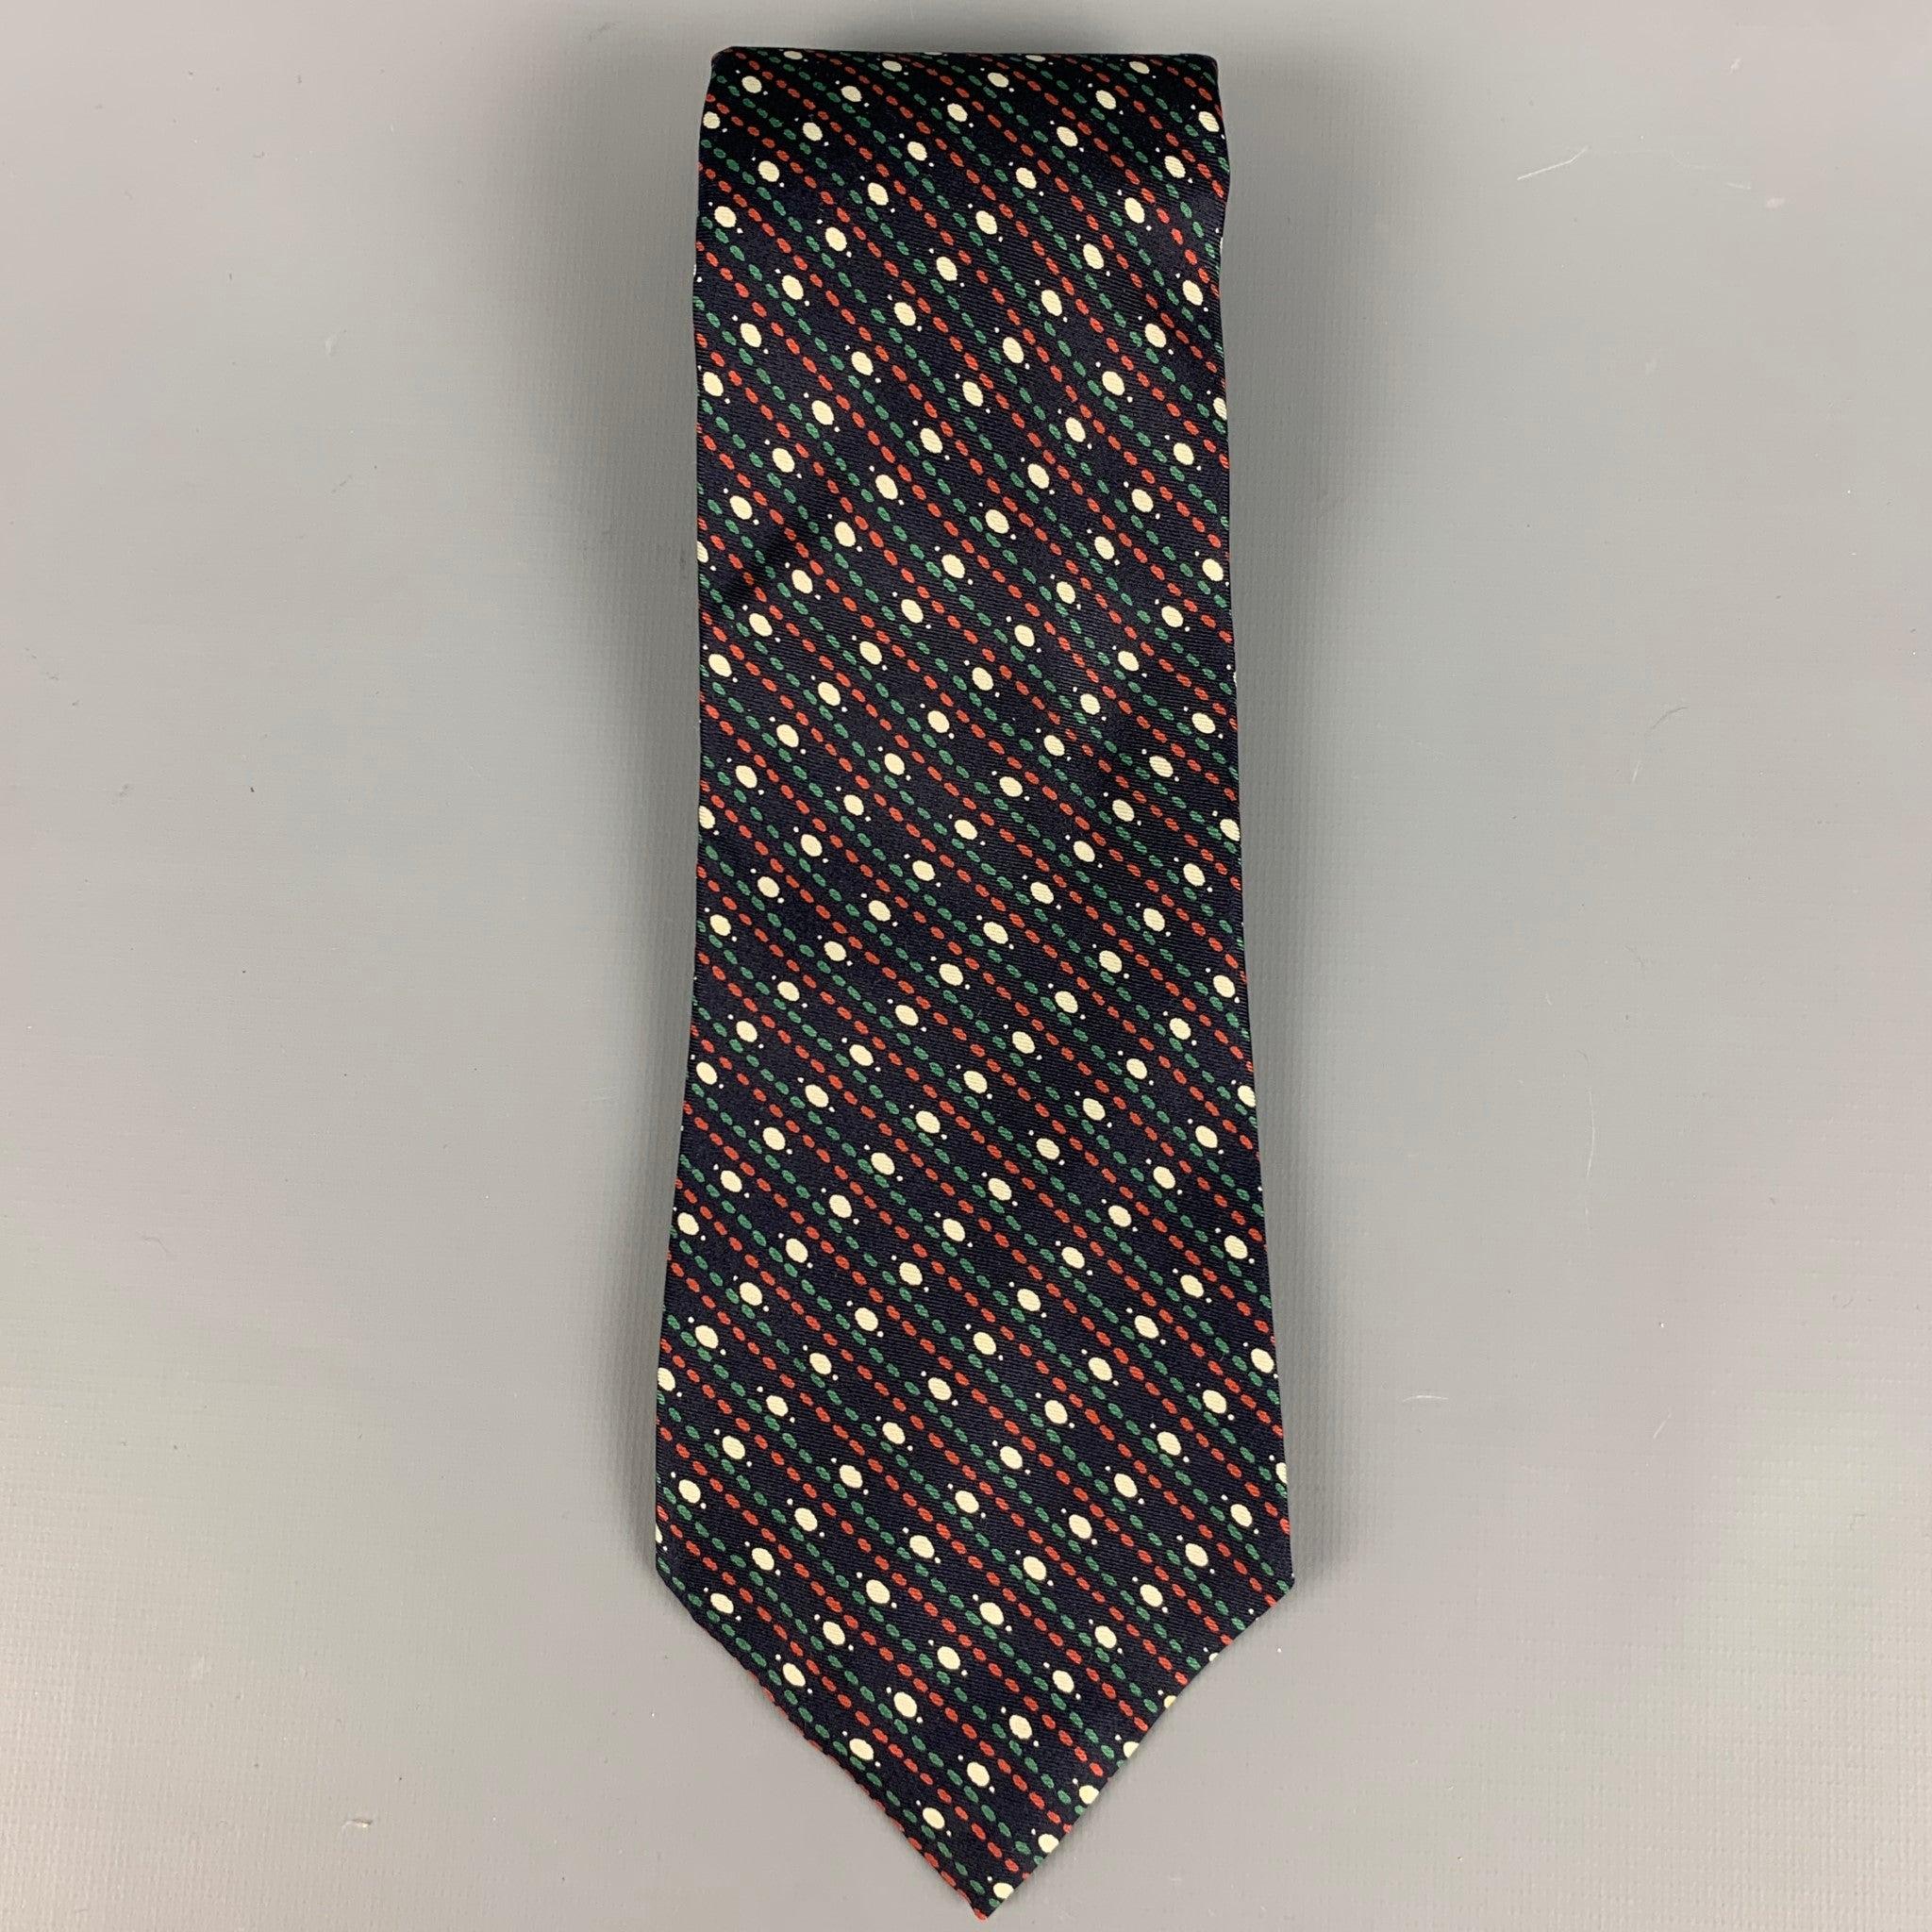 YVES SAINT LAURENT
necktie in a
navy silk fabric featuring a red, green, and white striped dots pattern. 
Very Good Pre-Owned Condition. Minor signs of wear. 

Measurements: 
  Width: 3.5 inches Length: 54 inches 
  
  
 
Reference: 127793
Category: